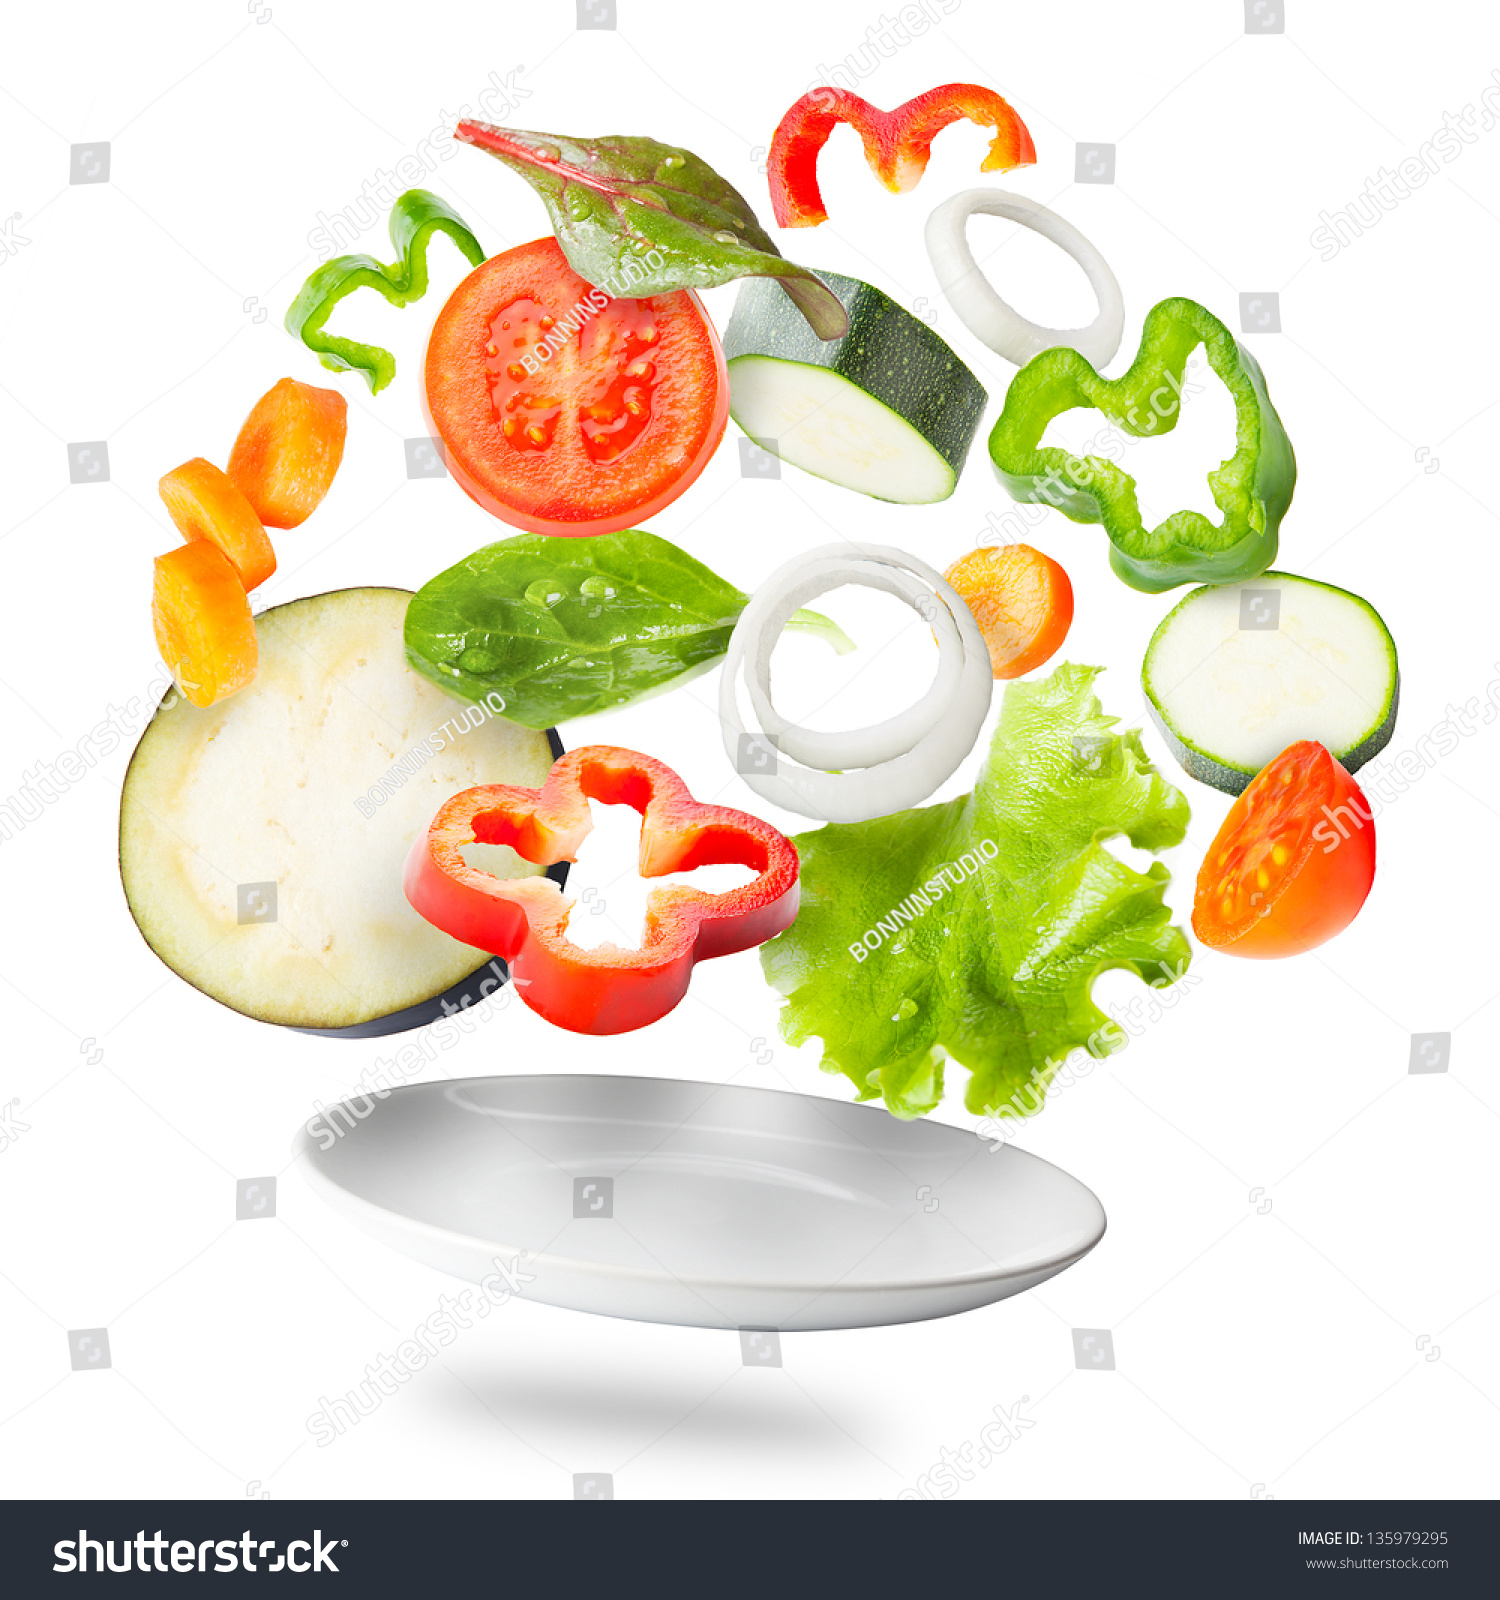 Assorted fresh vegetables flying in a plate / Light salad with flying fresh vegetables #135979295